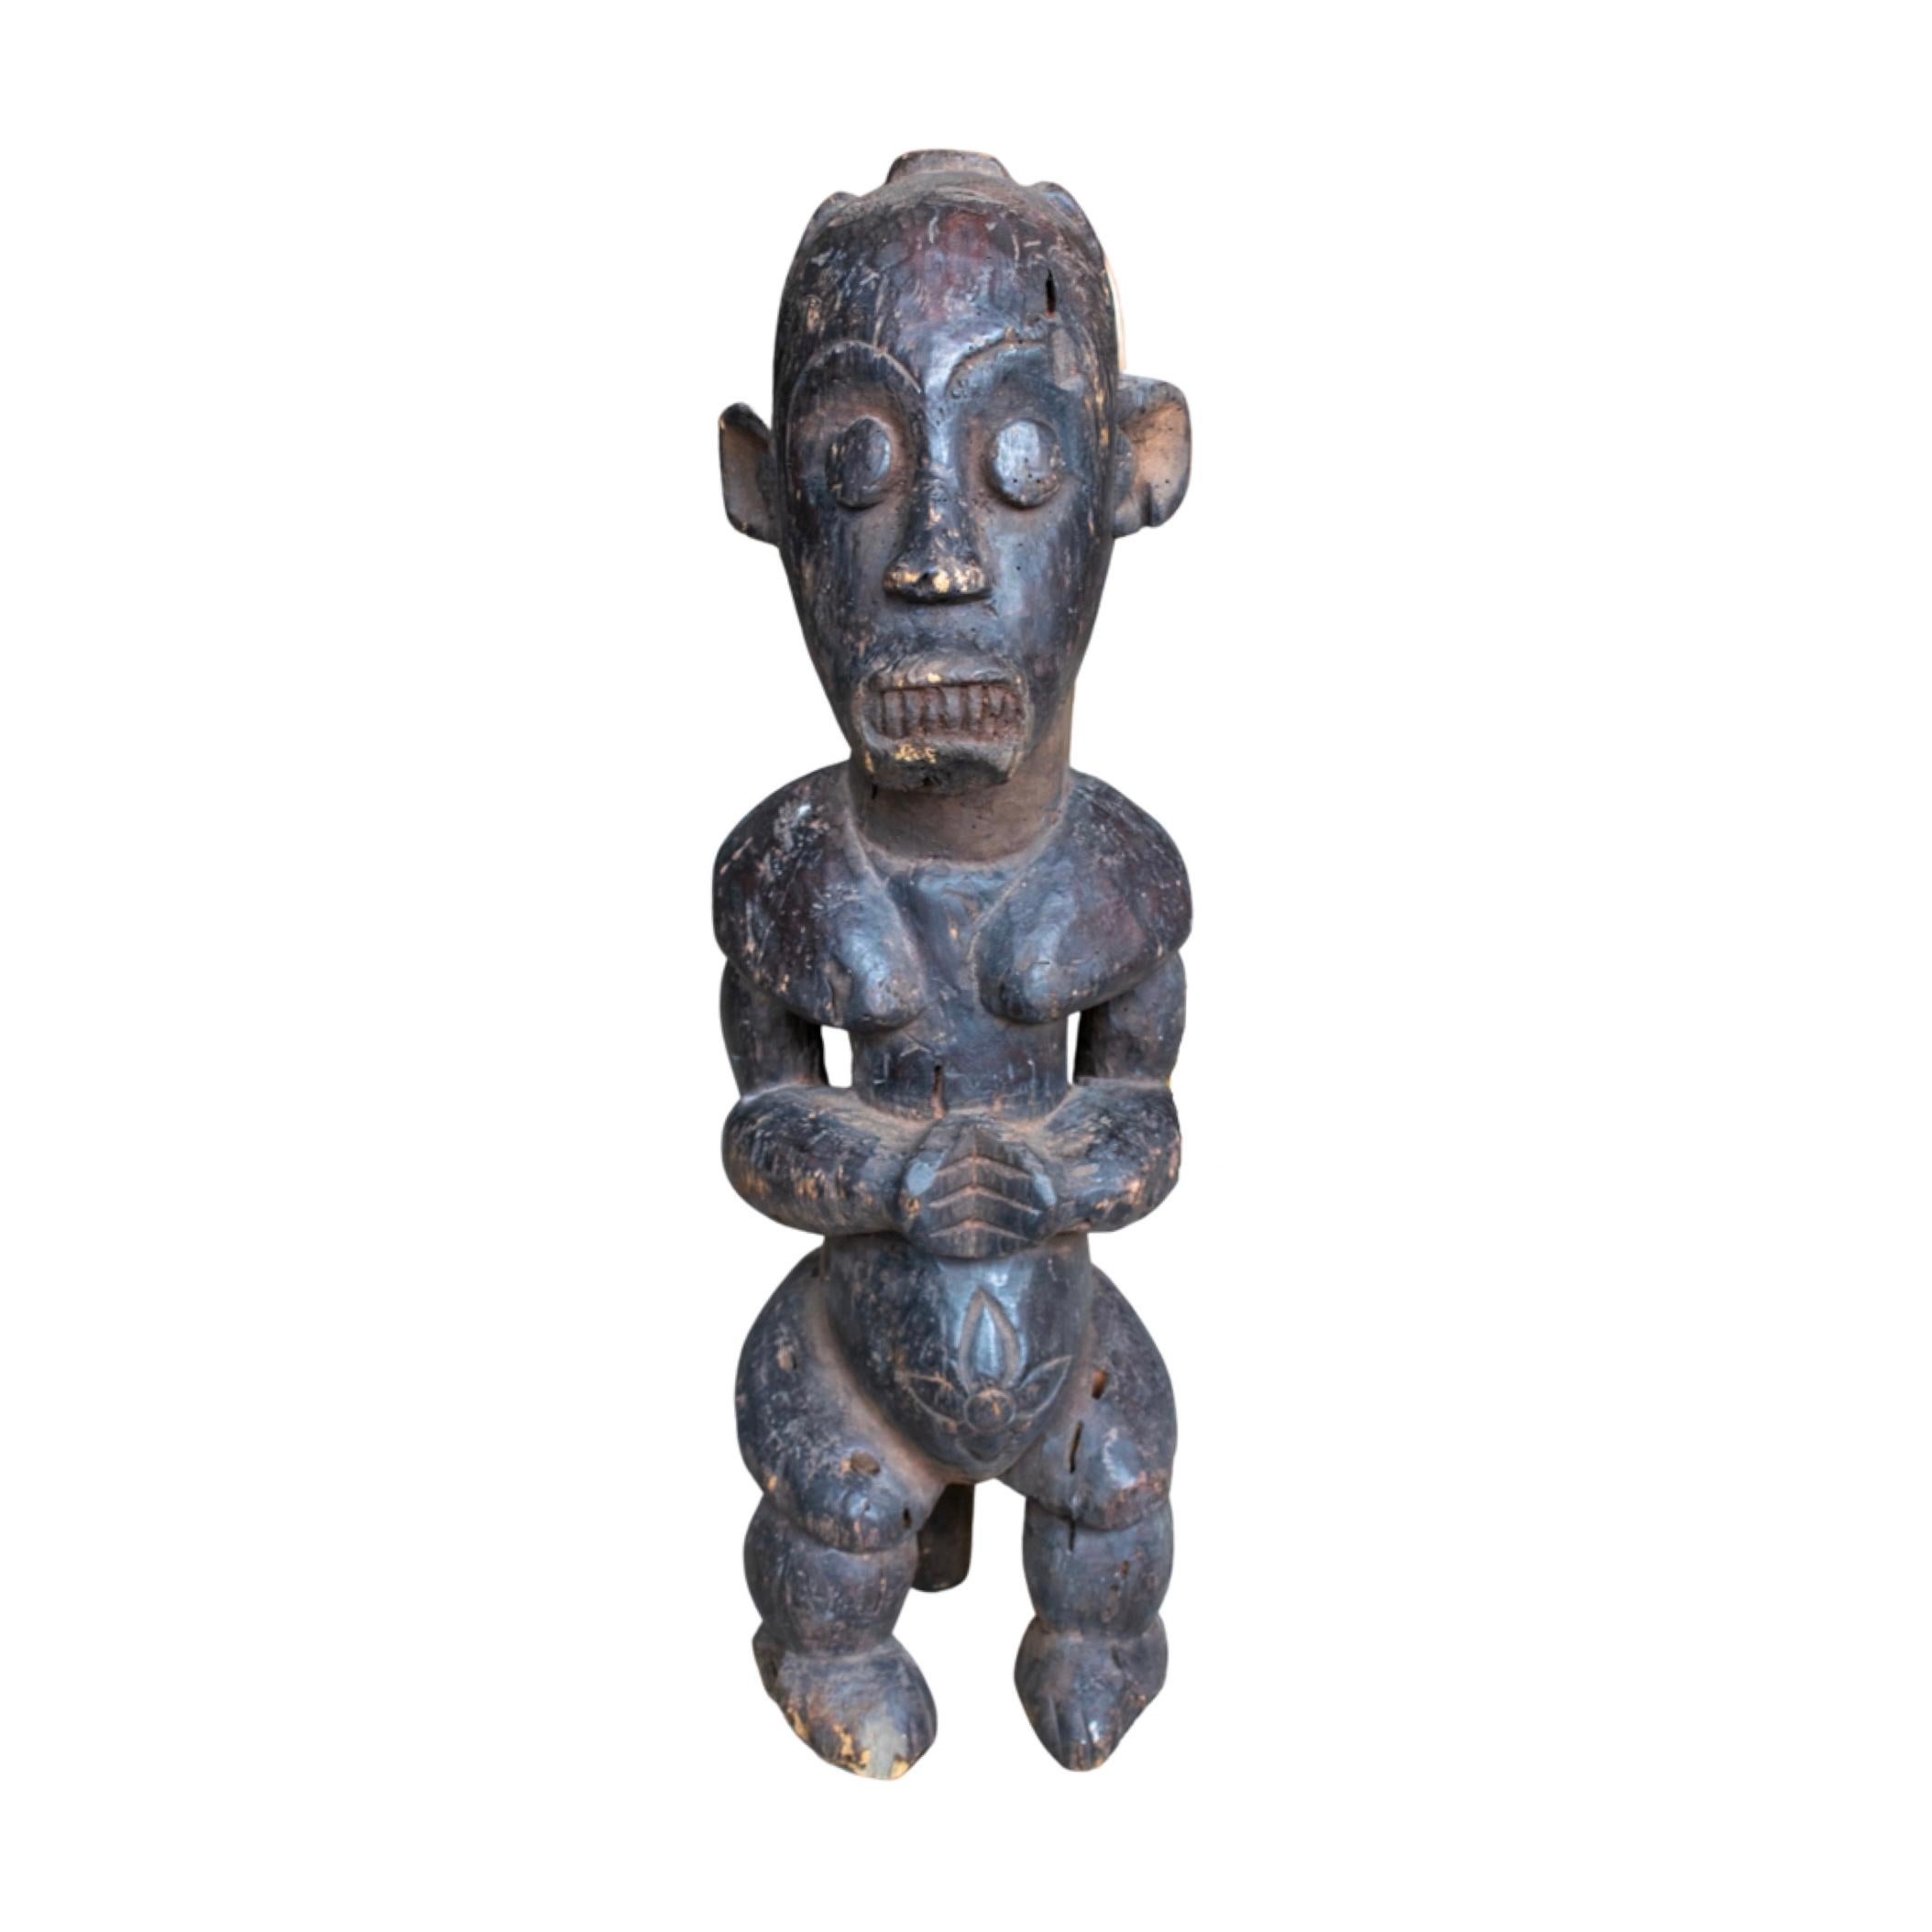 Hand-carved sculpture made of wood. Originates from Africa. Circa, 1950's.